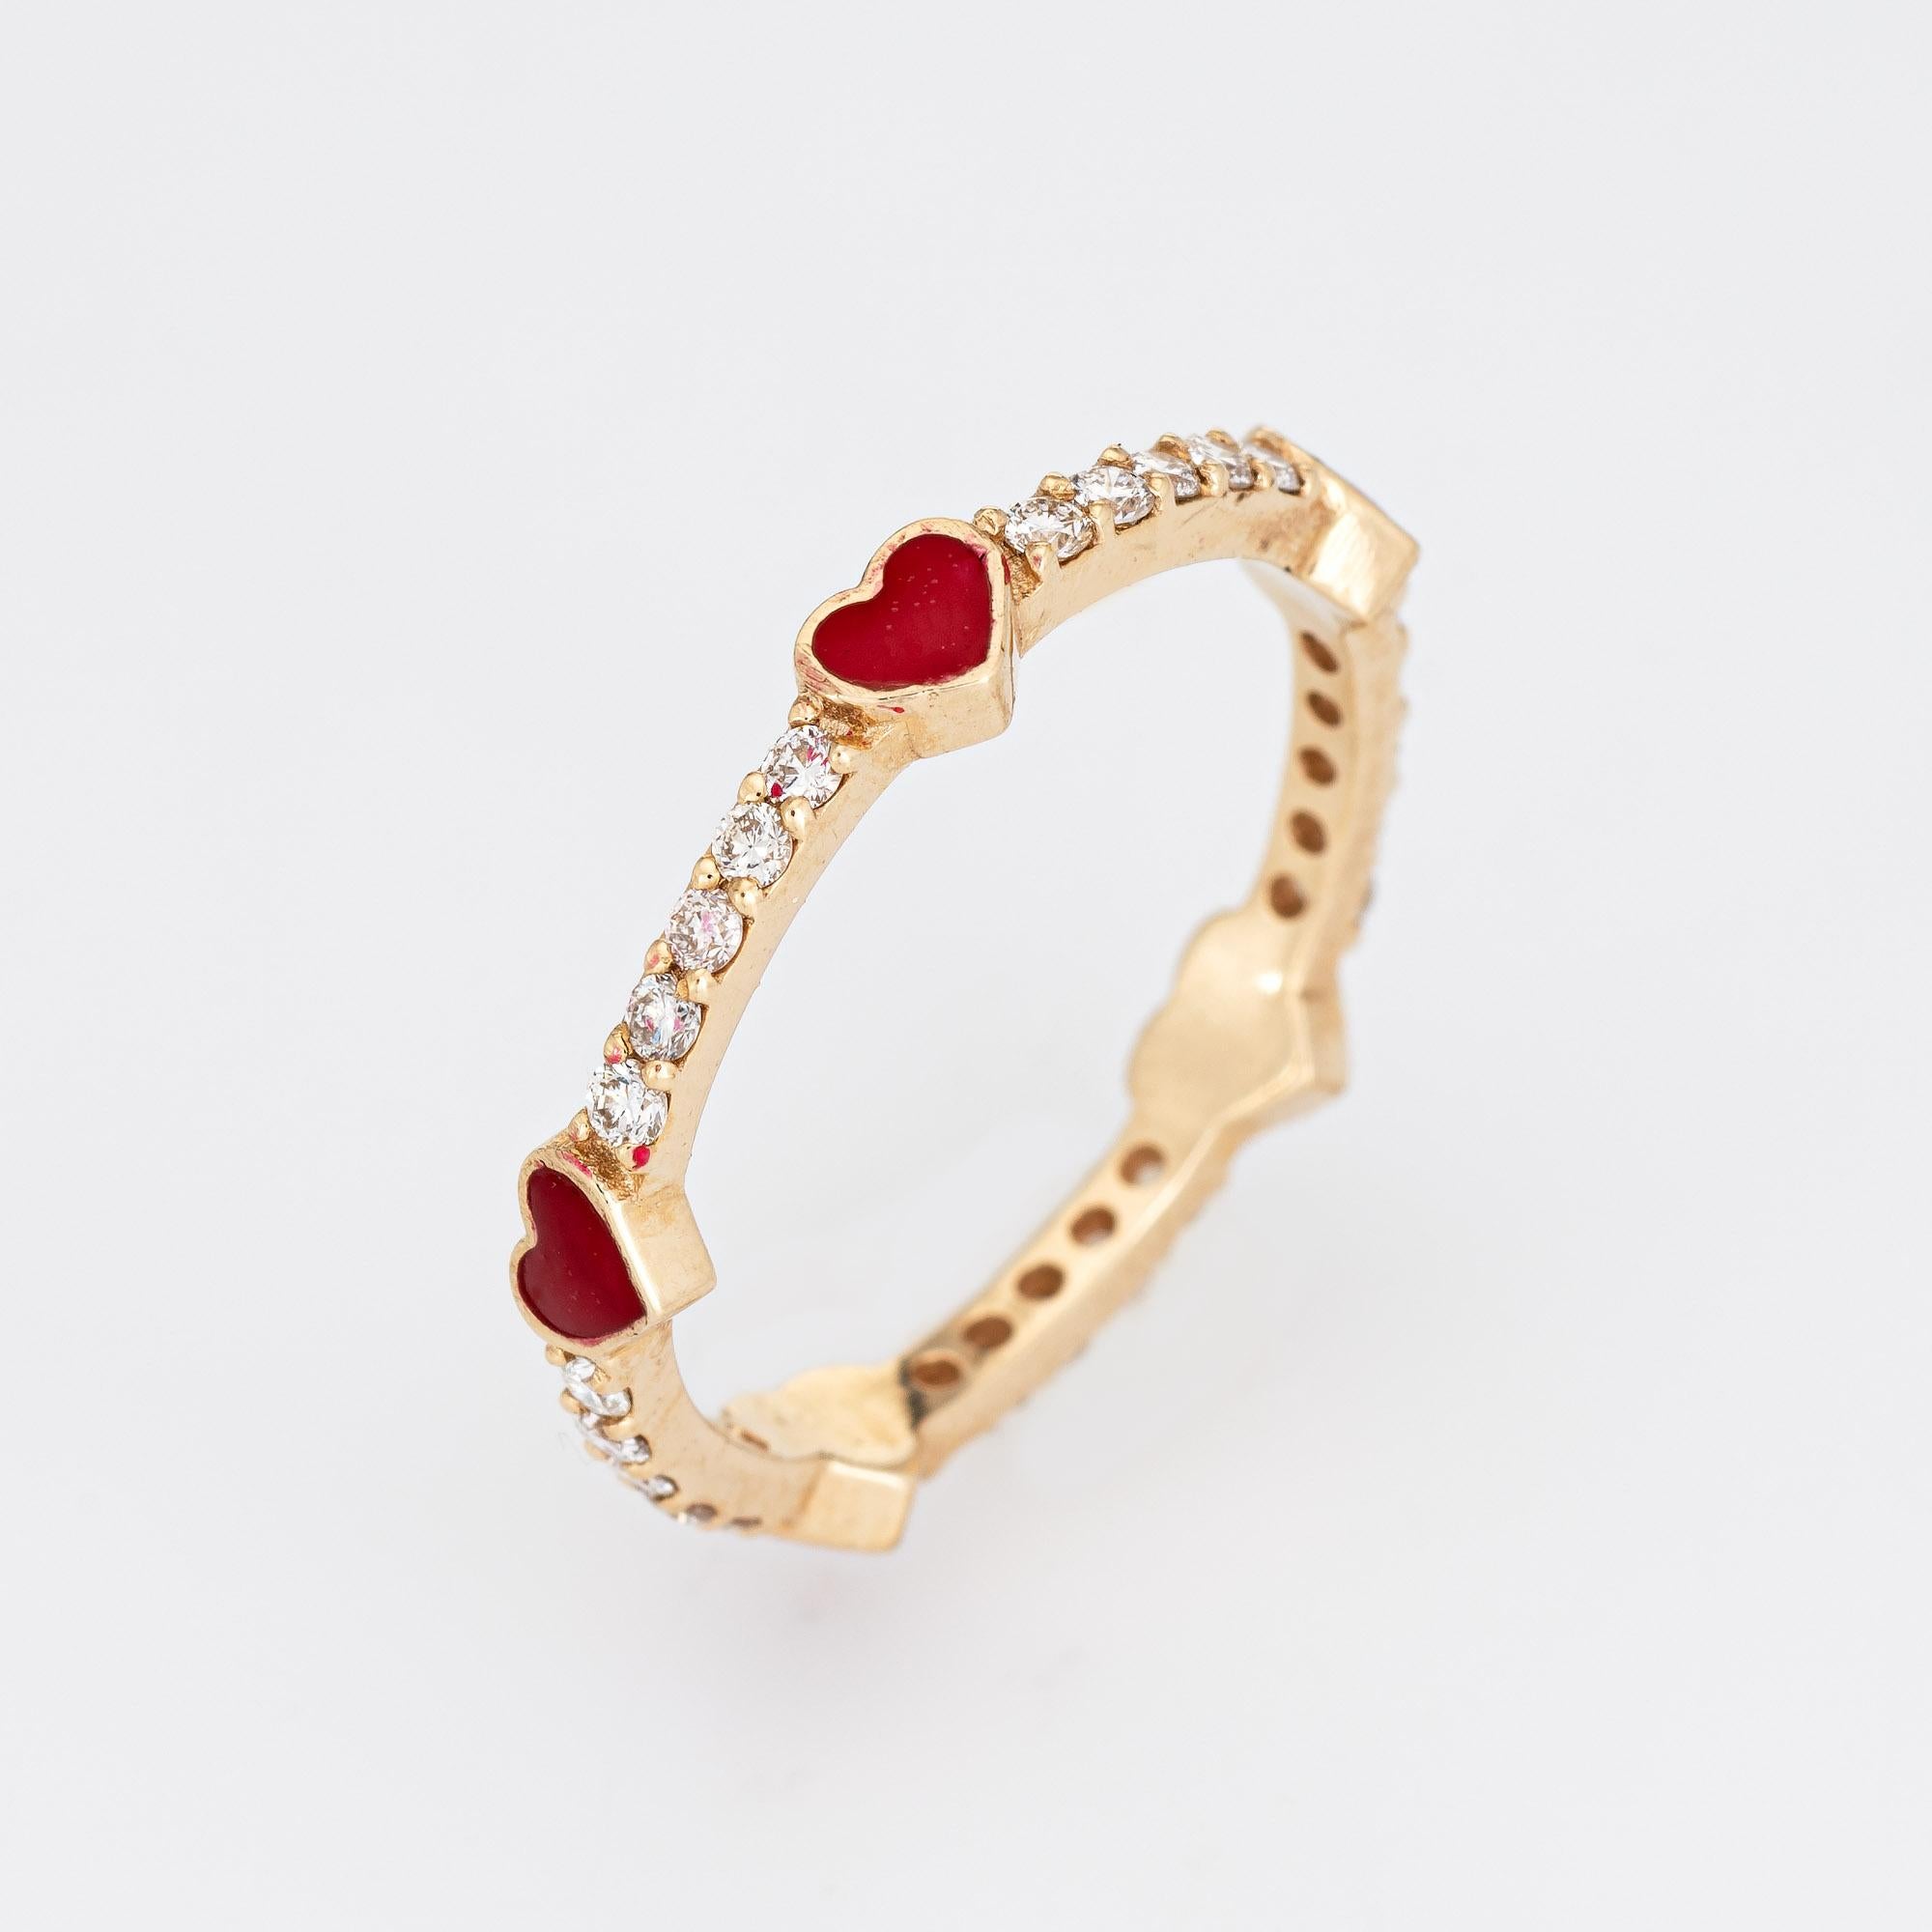 Stylish estate diamond eternity ring crafted in 14 karat yellow gold. 

Diamonds total an estimated 0.50 carats (estimated at H-I color and VS2-SI1 clarity). The red enamel is in excellent condition and free cracks or chips. 

The romantic eternity